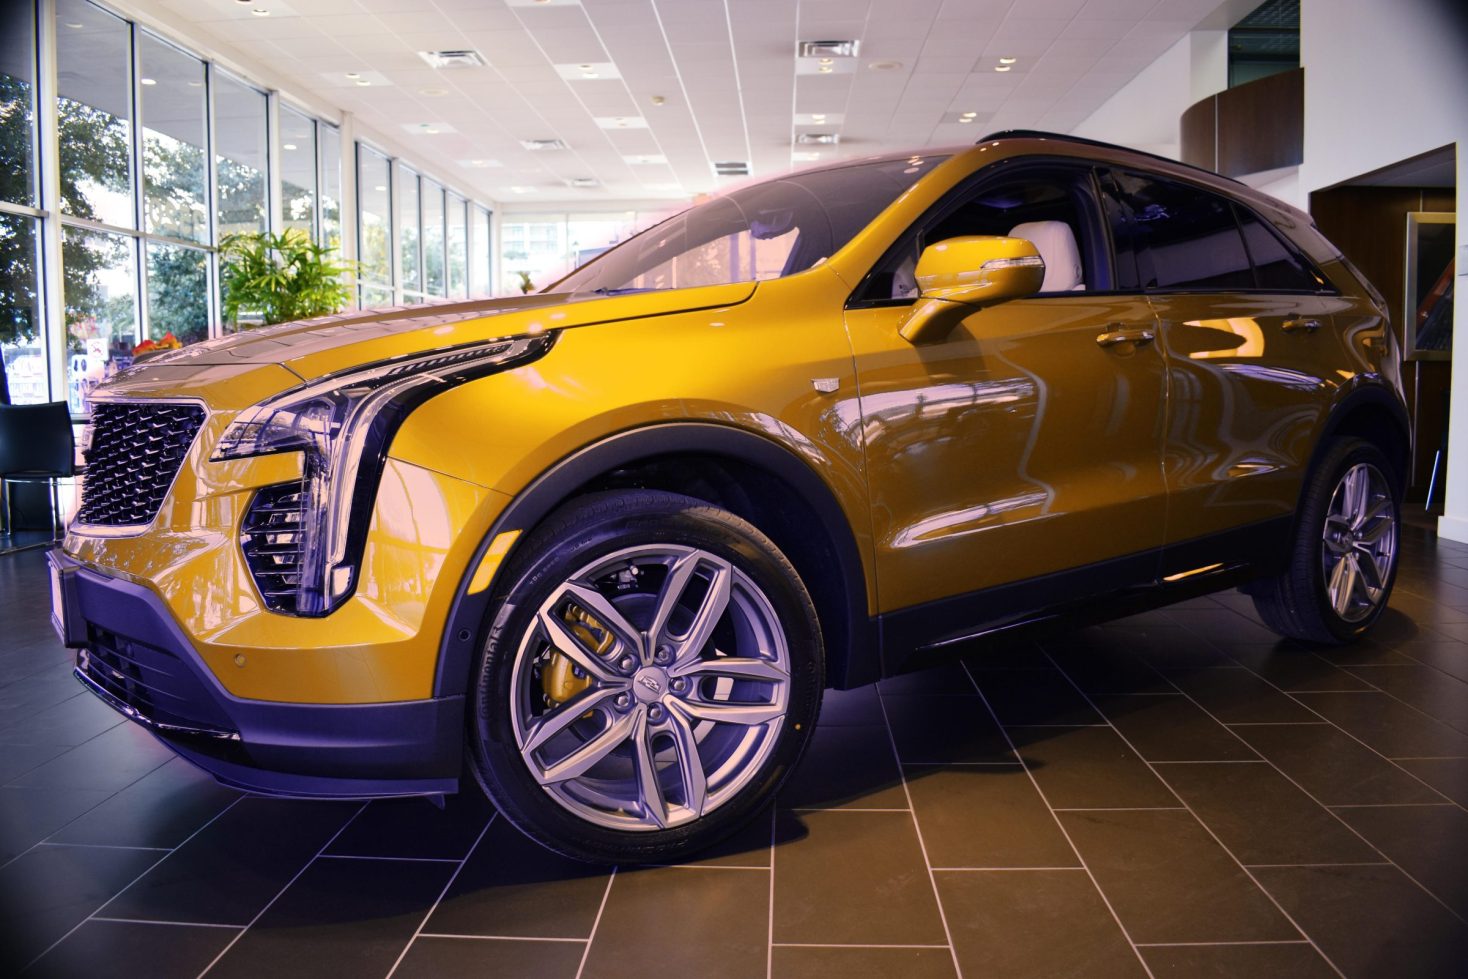 Do You Bring Your Older SUV to the Dealership?